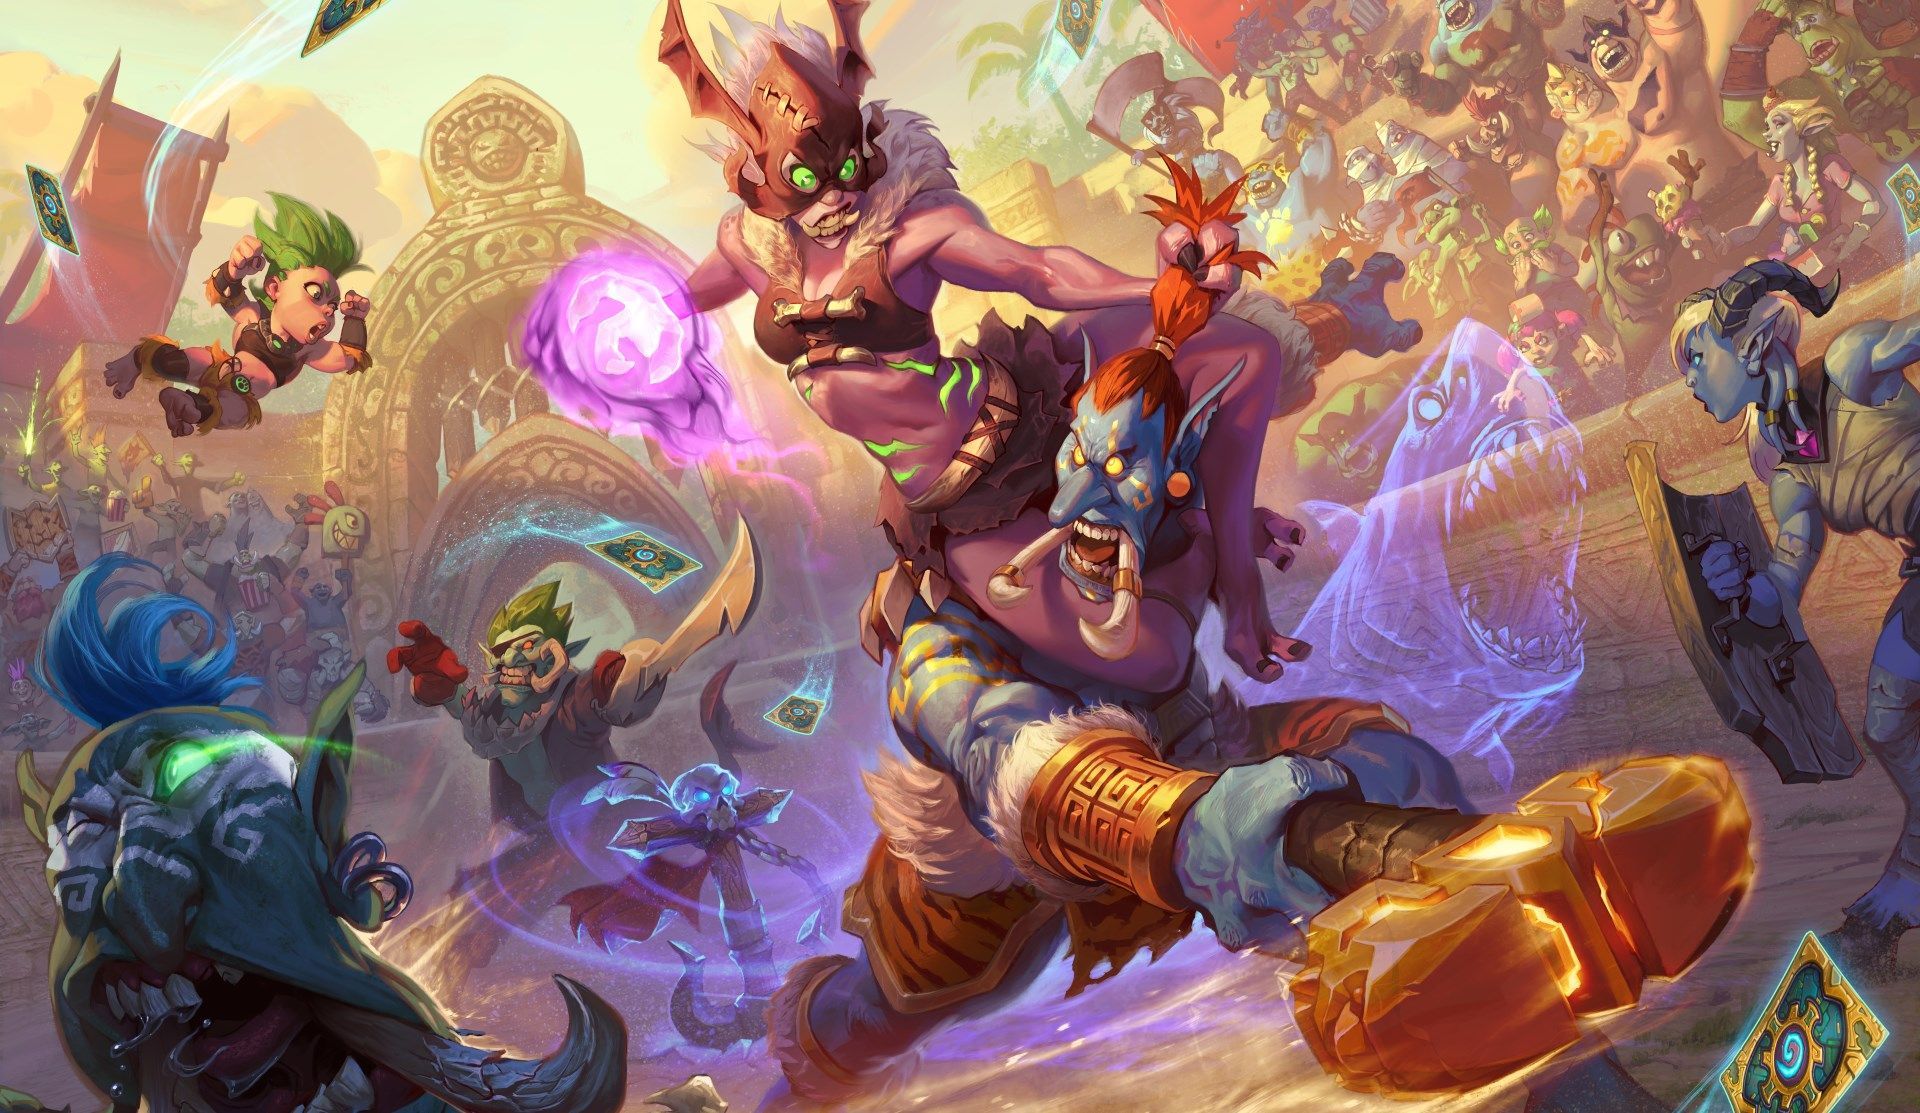 Interview with Hearthstone Executive Producer Chris Sigaty and Senior Game Designer Dean Ayala